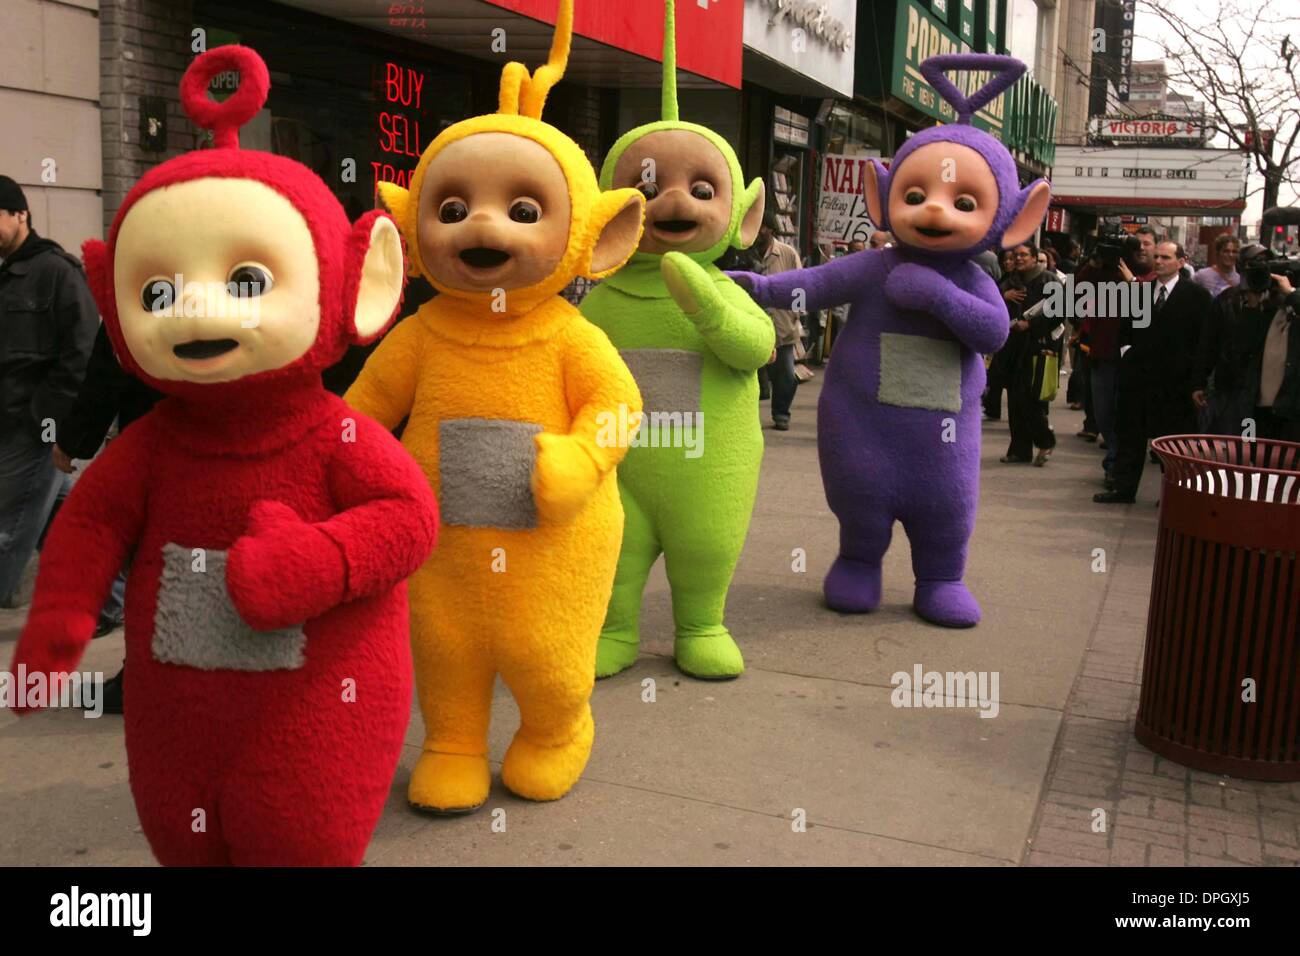 Mar. 25, 2006 - New York, New York, U.S. - THE TELETUBBIES KICK OFF  IT'S GLOBAL 10 YEAR CELEBRATION AND THEIR FIRST VISIT TO AMERICAN SOIL WITH A WEEKLONG TOUR OF NEW YORK New York LANDMARKS, STARTING WITH A TRIP TO THE WORLD FAMOUS APOLLO THEATRE   .HARLEM USA  03-26-2007.       2007.THE TELETUBBIES .K52334RM.(Credit Image: © Rick Mackler/Globe Photos/ZUMAPRESS.com) Stock Photo